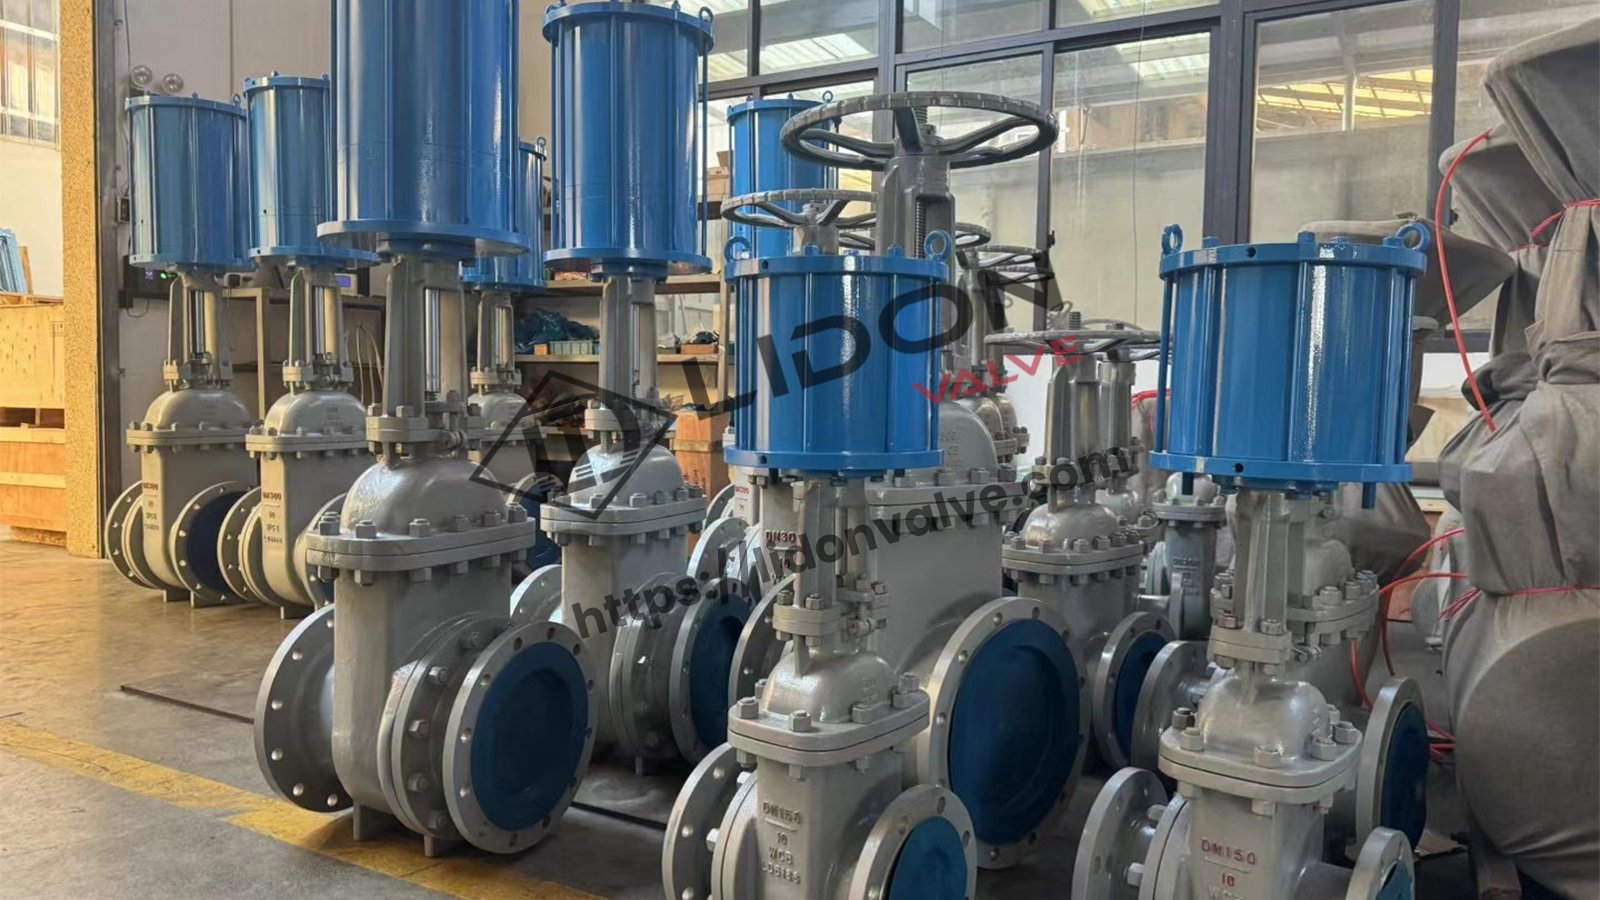 Gate Valve Manufacturers: Everything You Need to Know